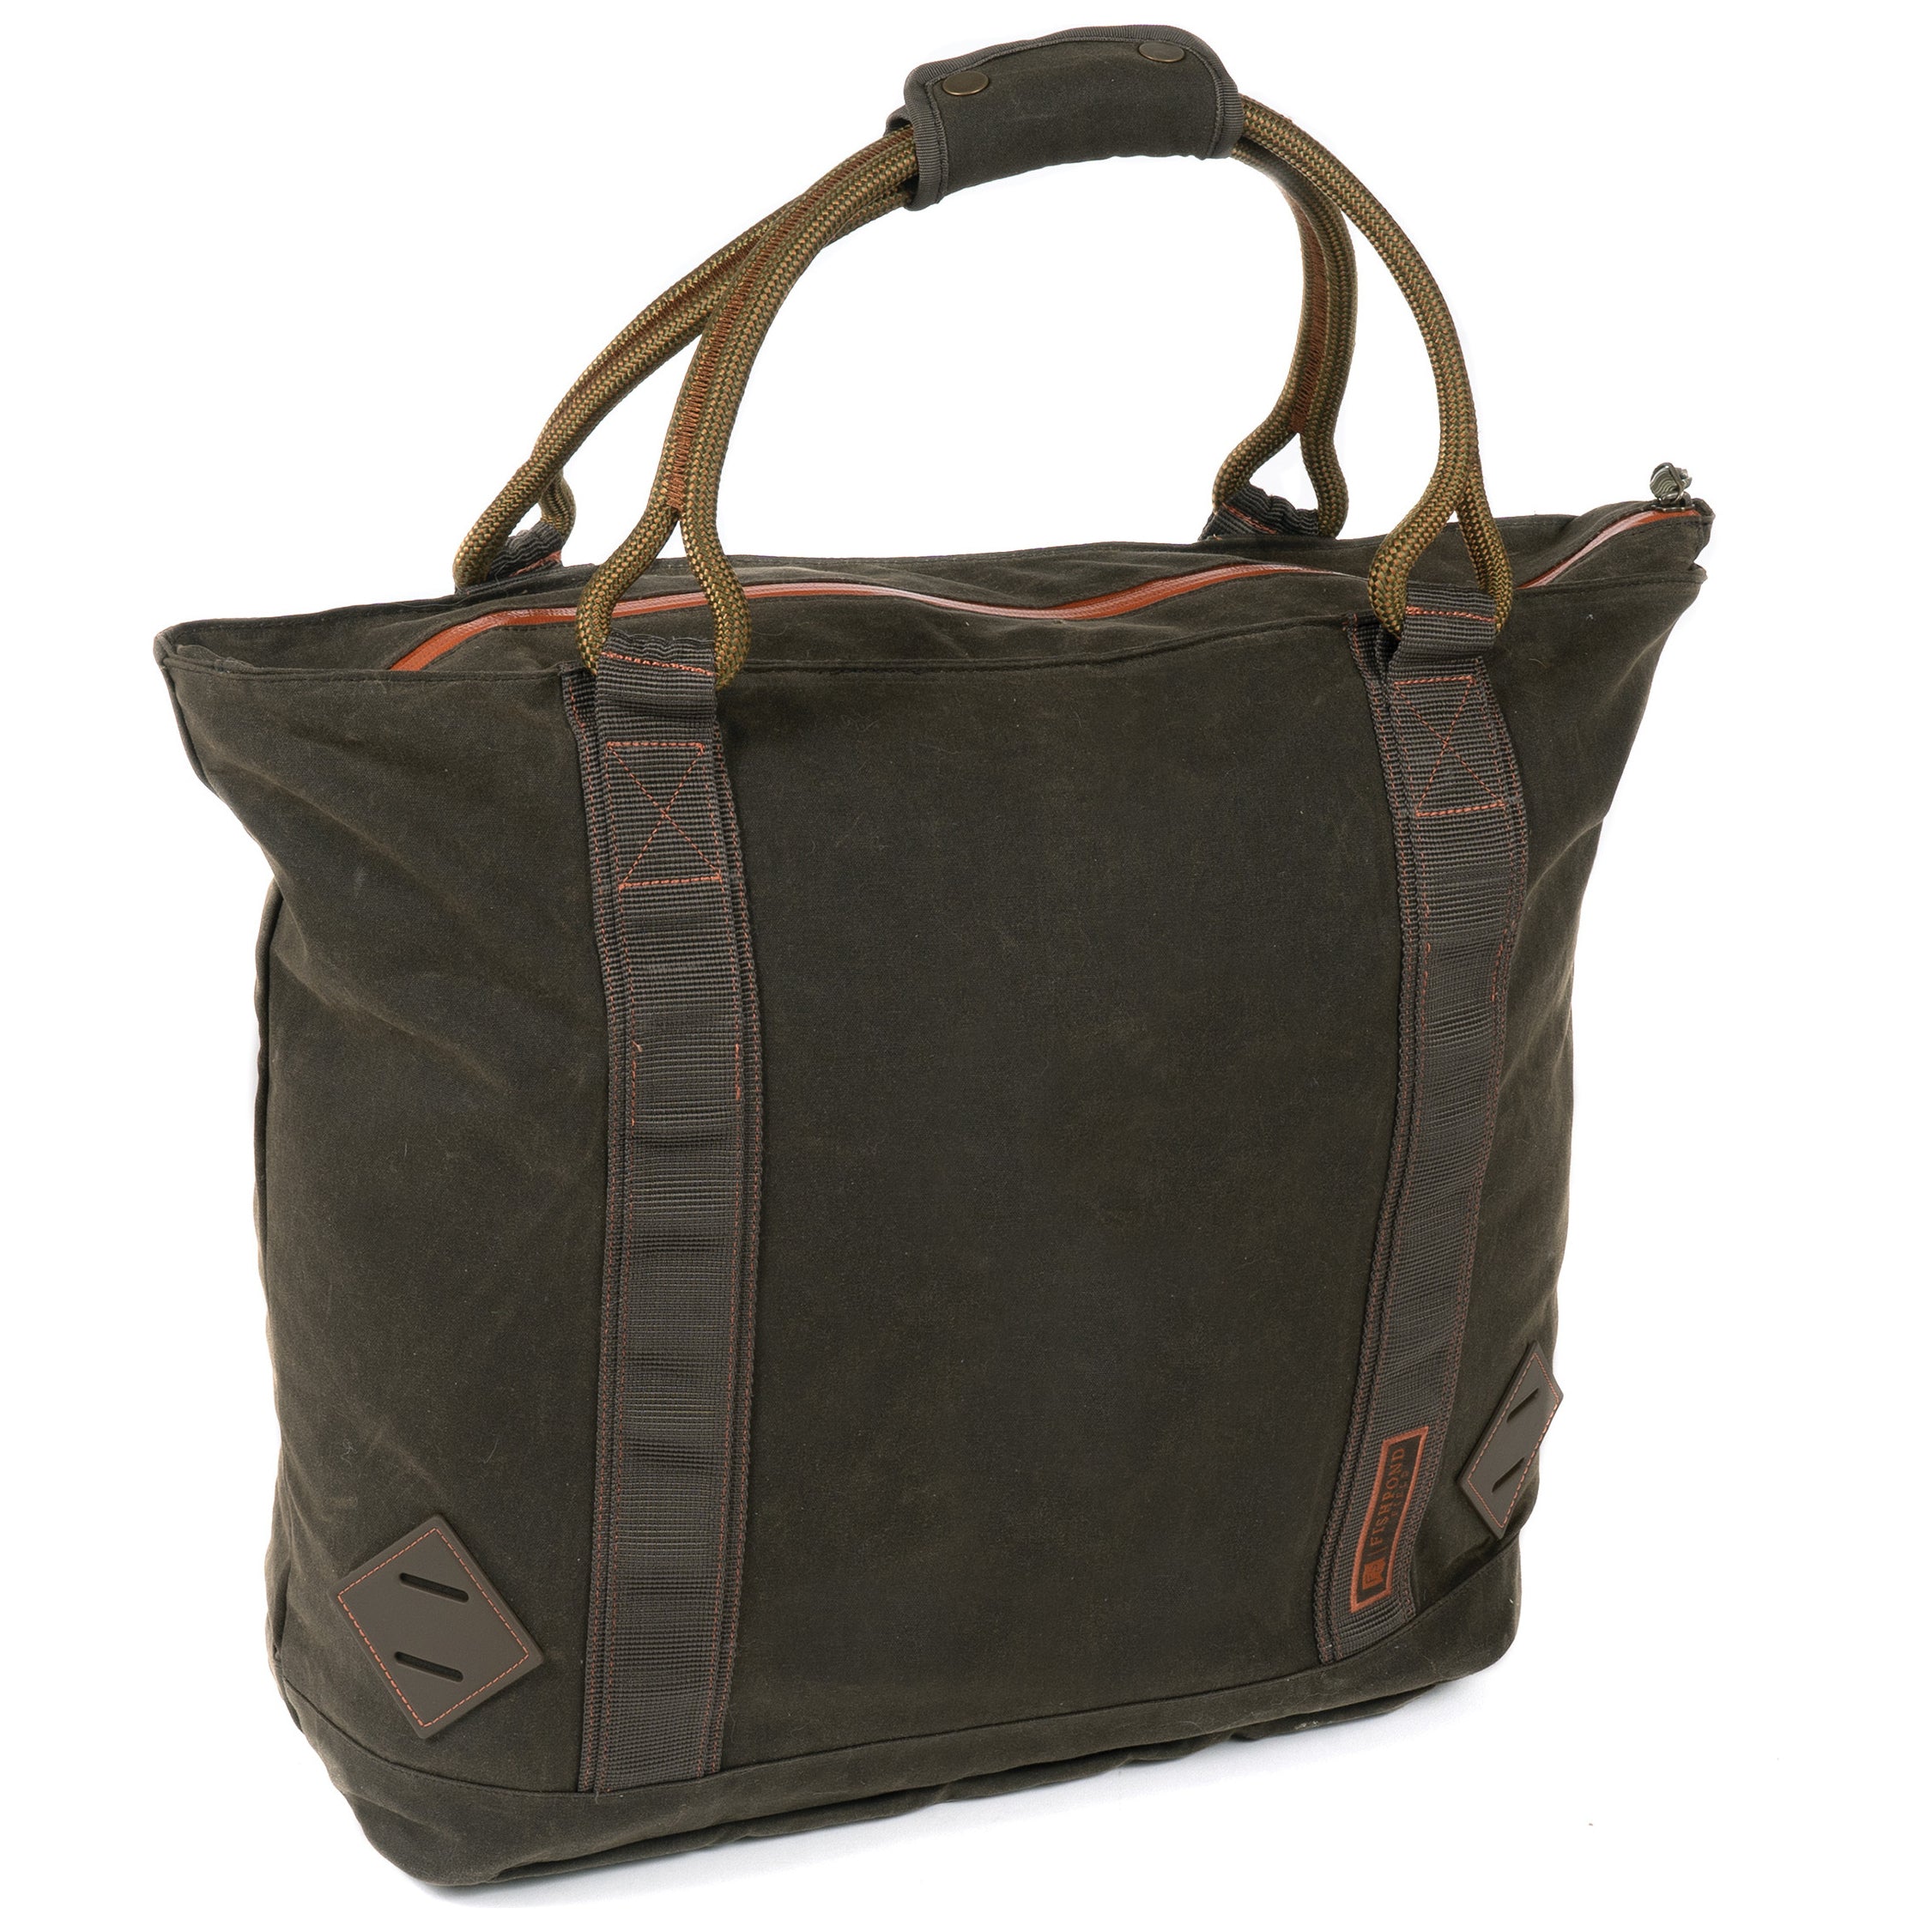 Fishpond Horse Thief Tote Peat Moss Image 02